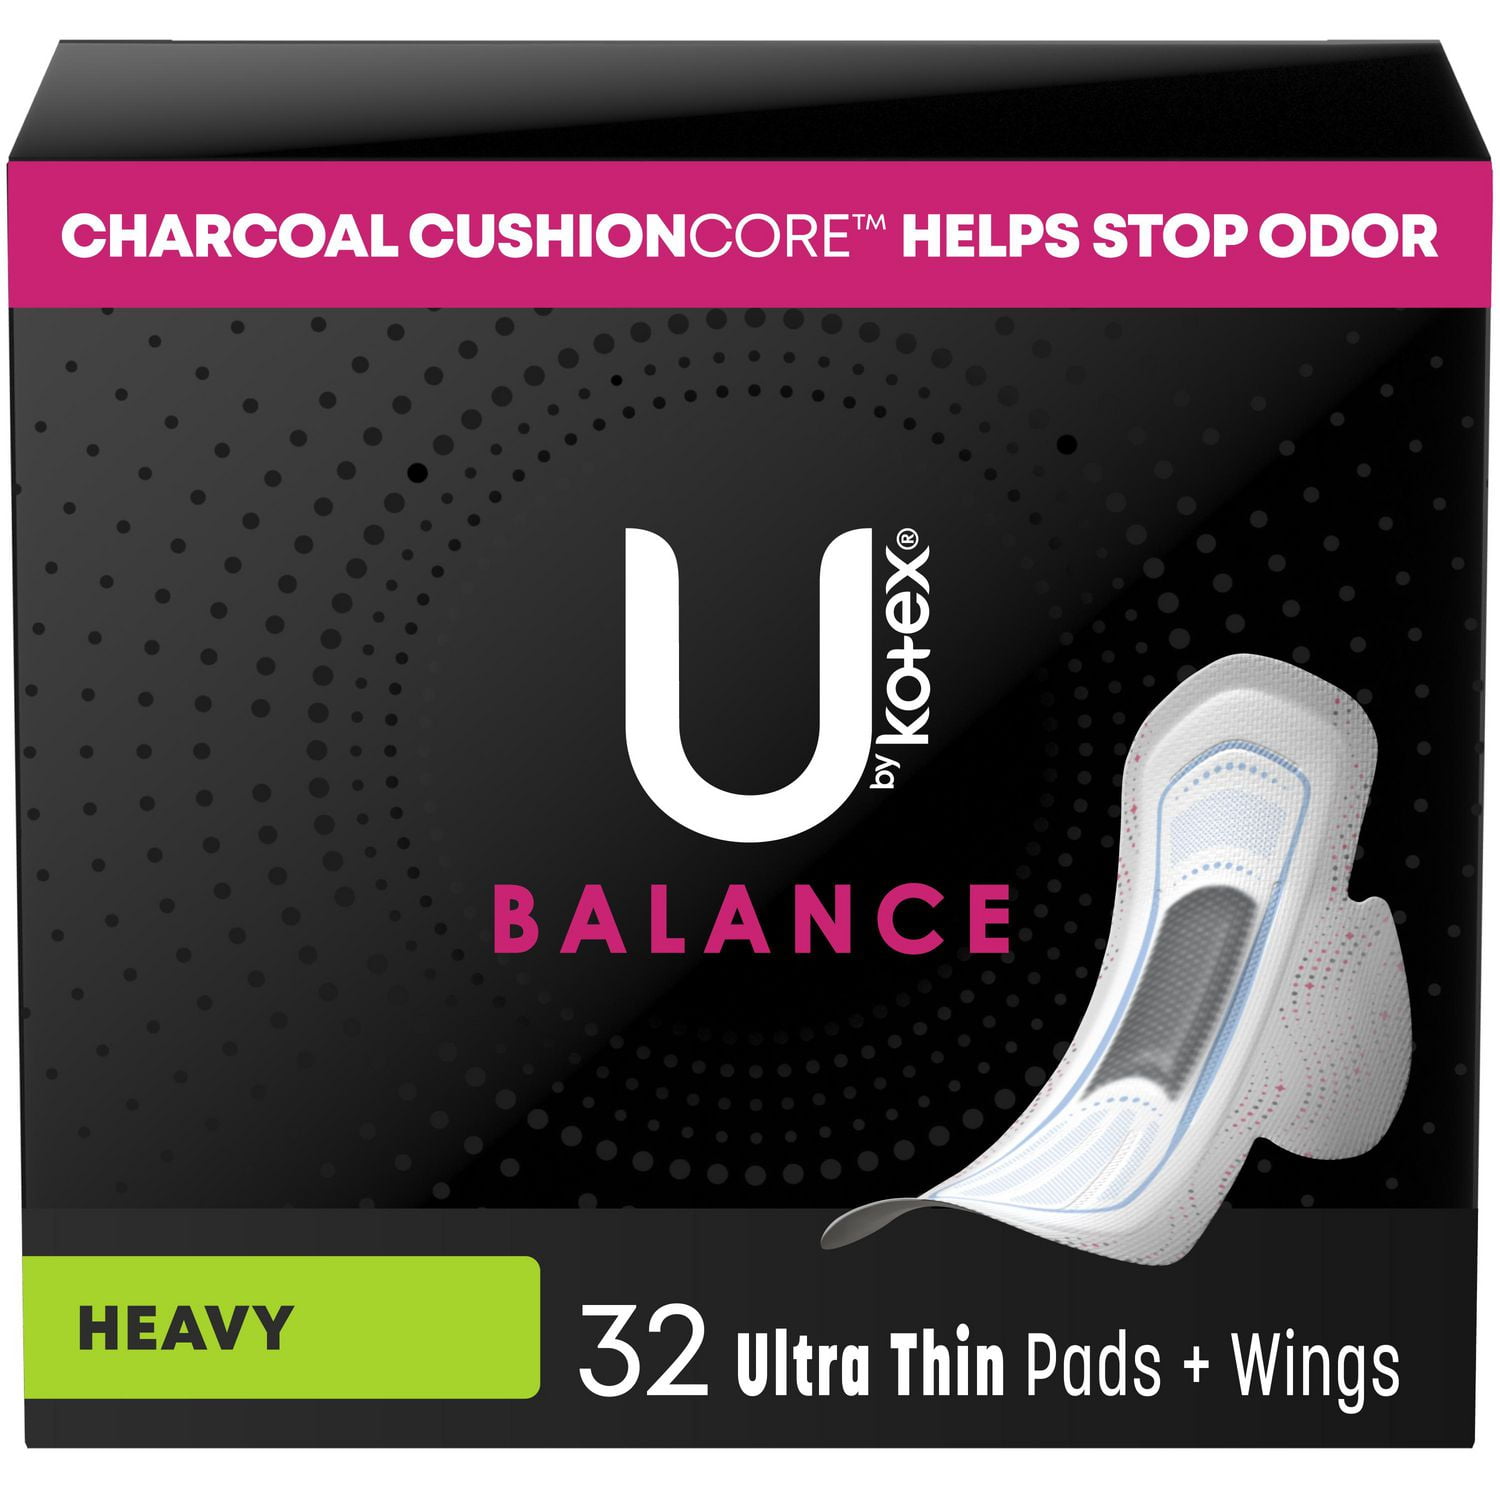 U by Kotex Balance Ultra Thin Pads with Wings, Heavy Absorbency, 32 Count,  UBK PAD 32 